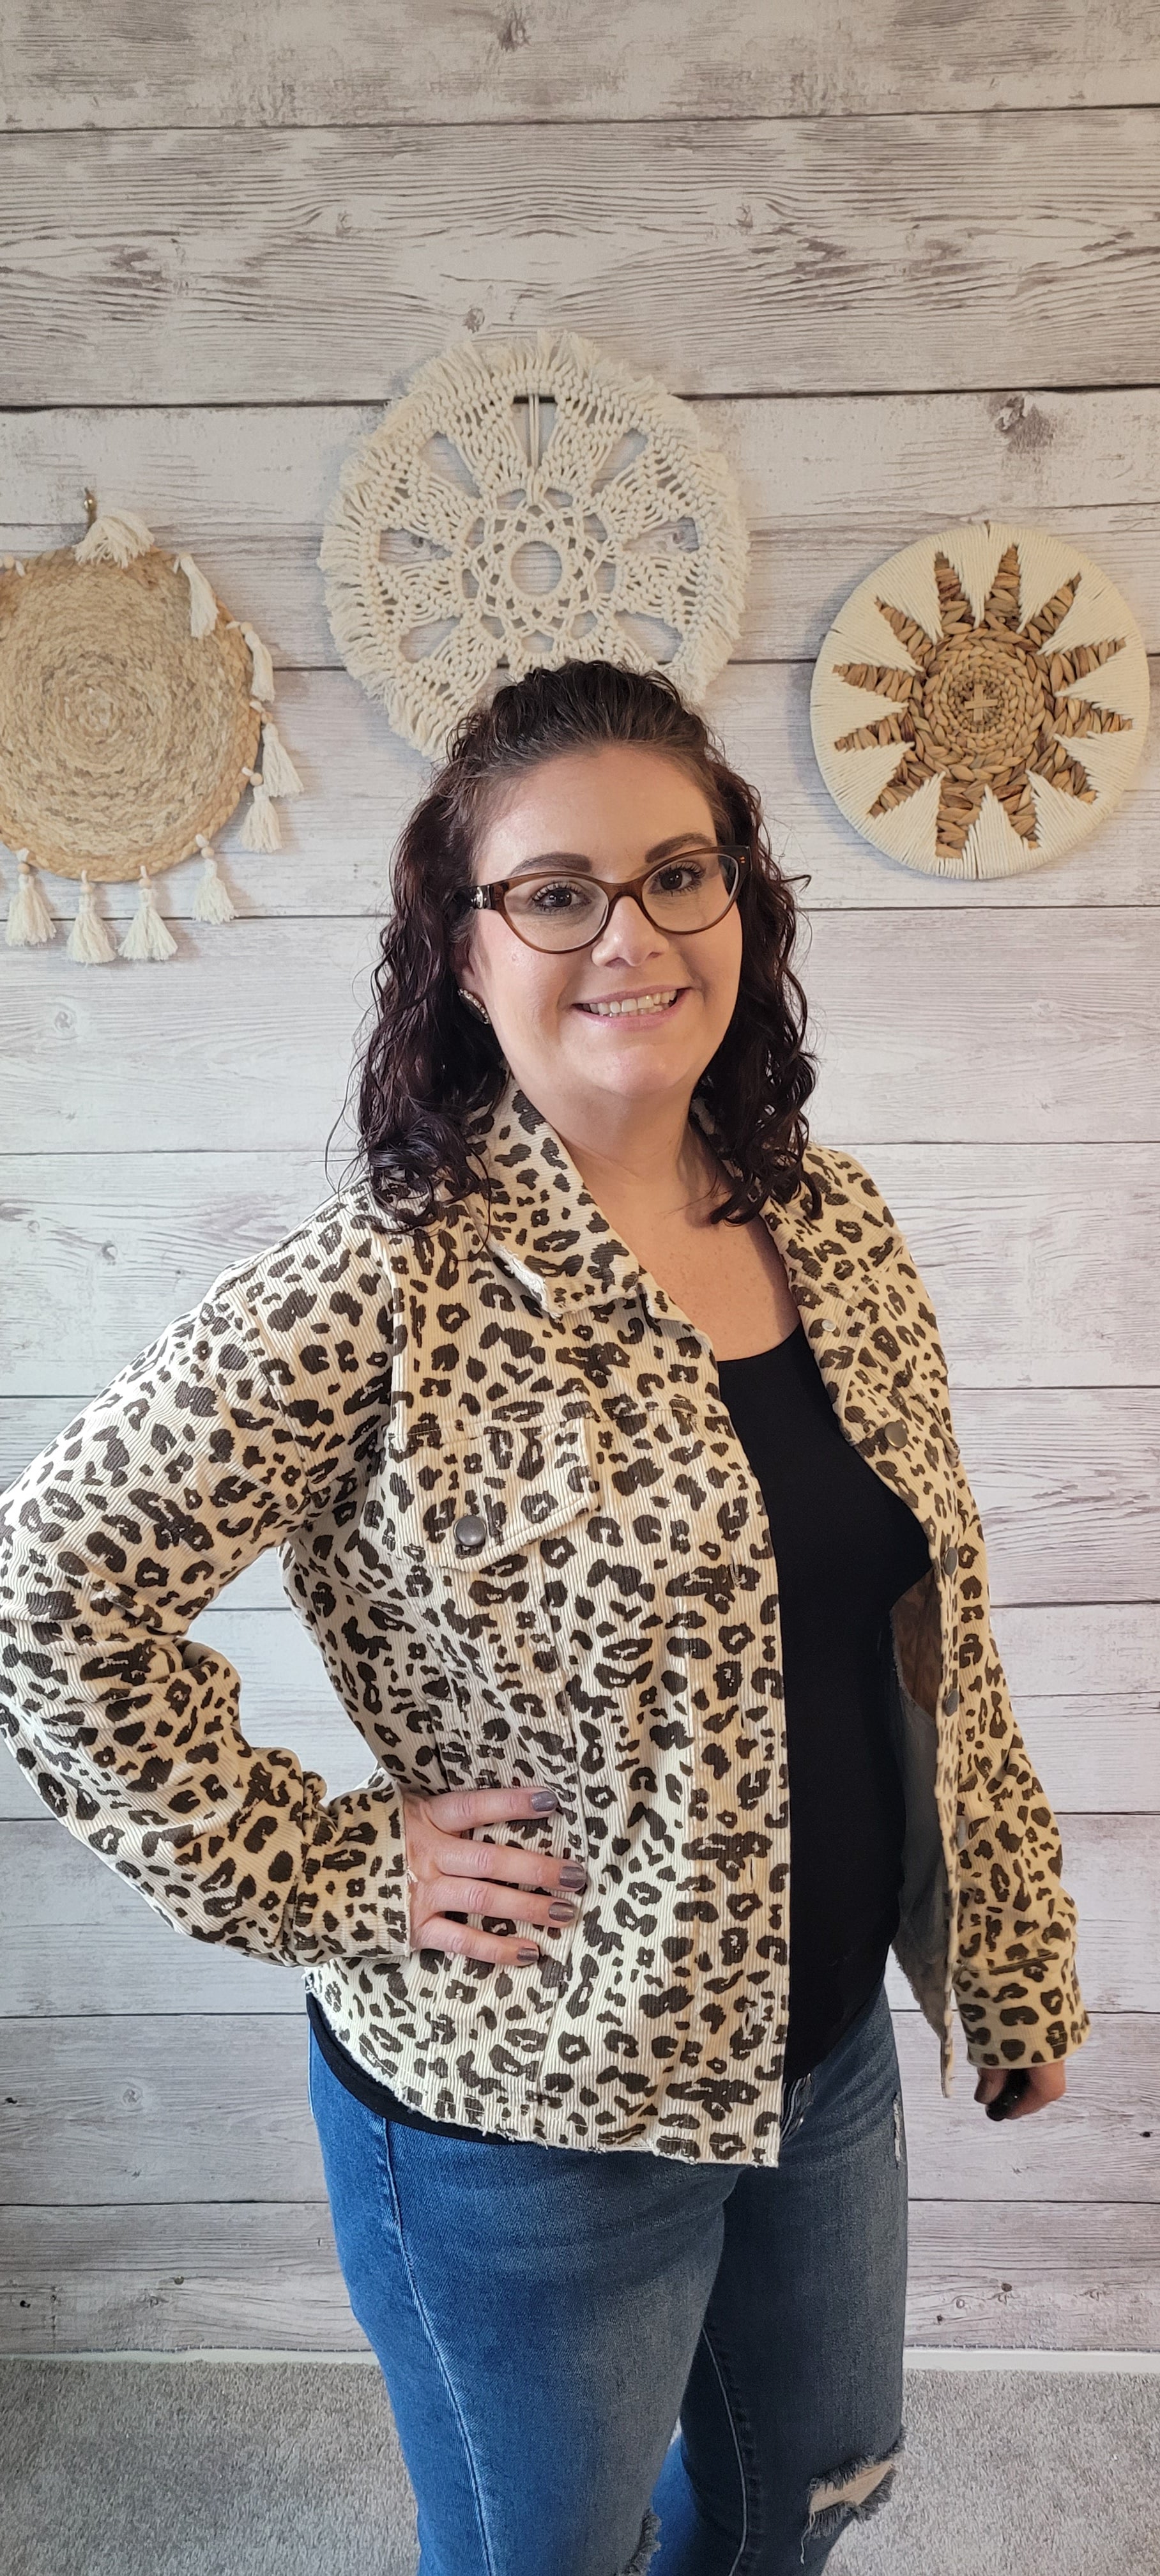 Cozy up in this out-of-the-ordinary "Emerie Ivory Washed Leopard Trucker Jacket". A fashion statement with flair, this frayed-edge beauty features metal button front closure and plenty of pockets for your stuff. Put it on and get ready to roar! Sizes small through large.